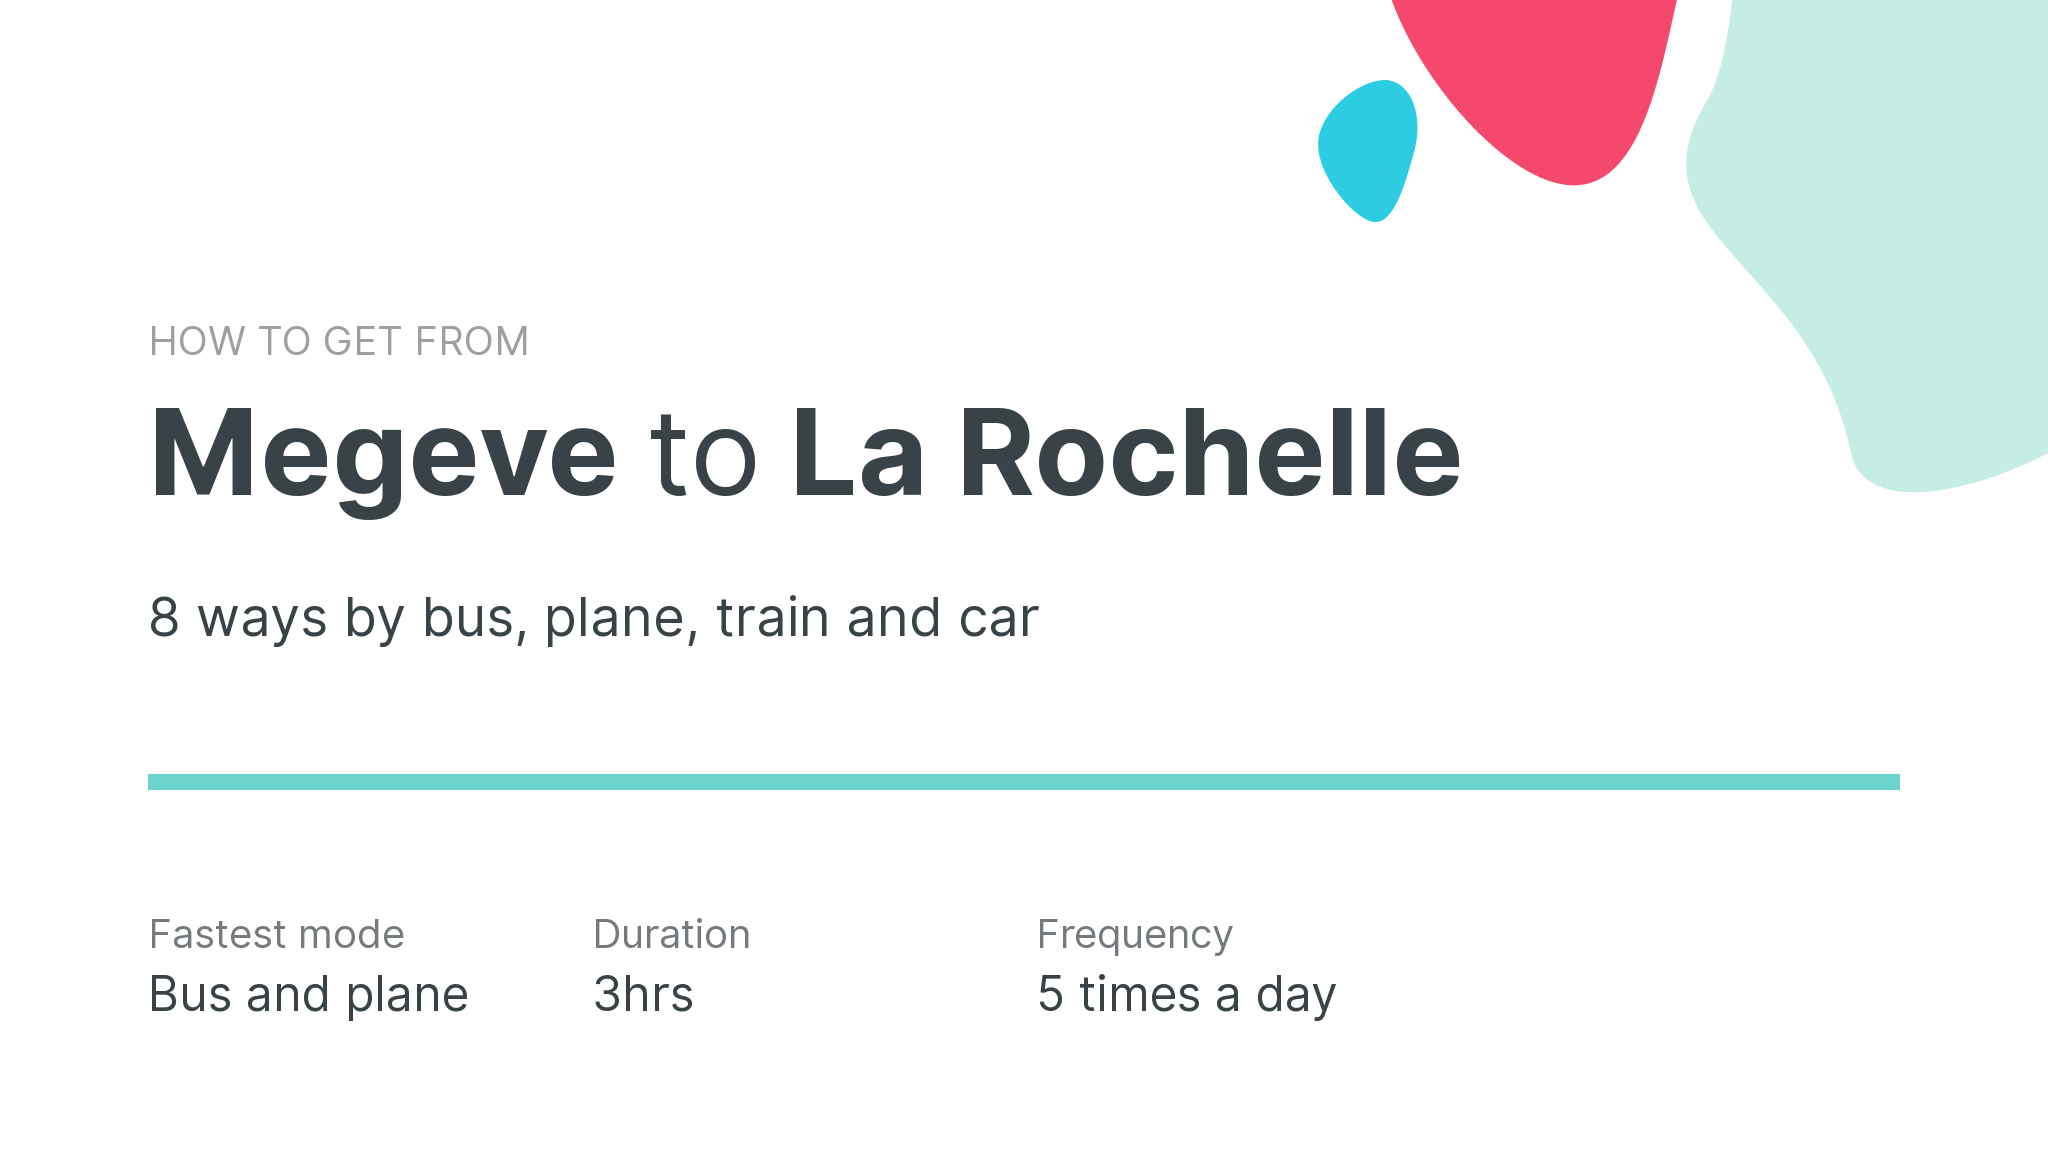 How do I get from Megeve to La Rochelle